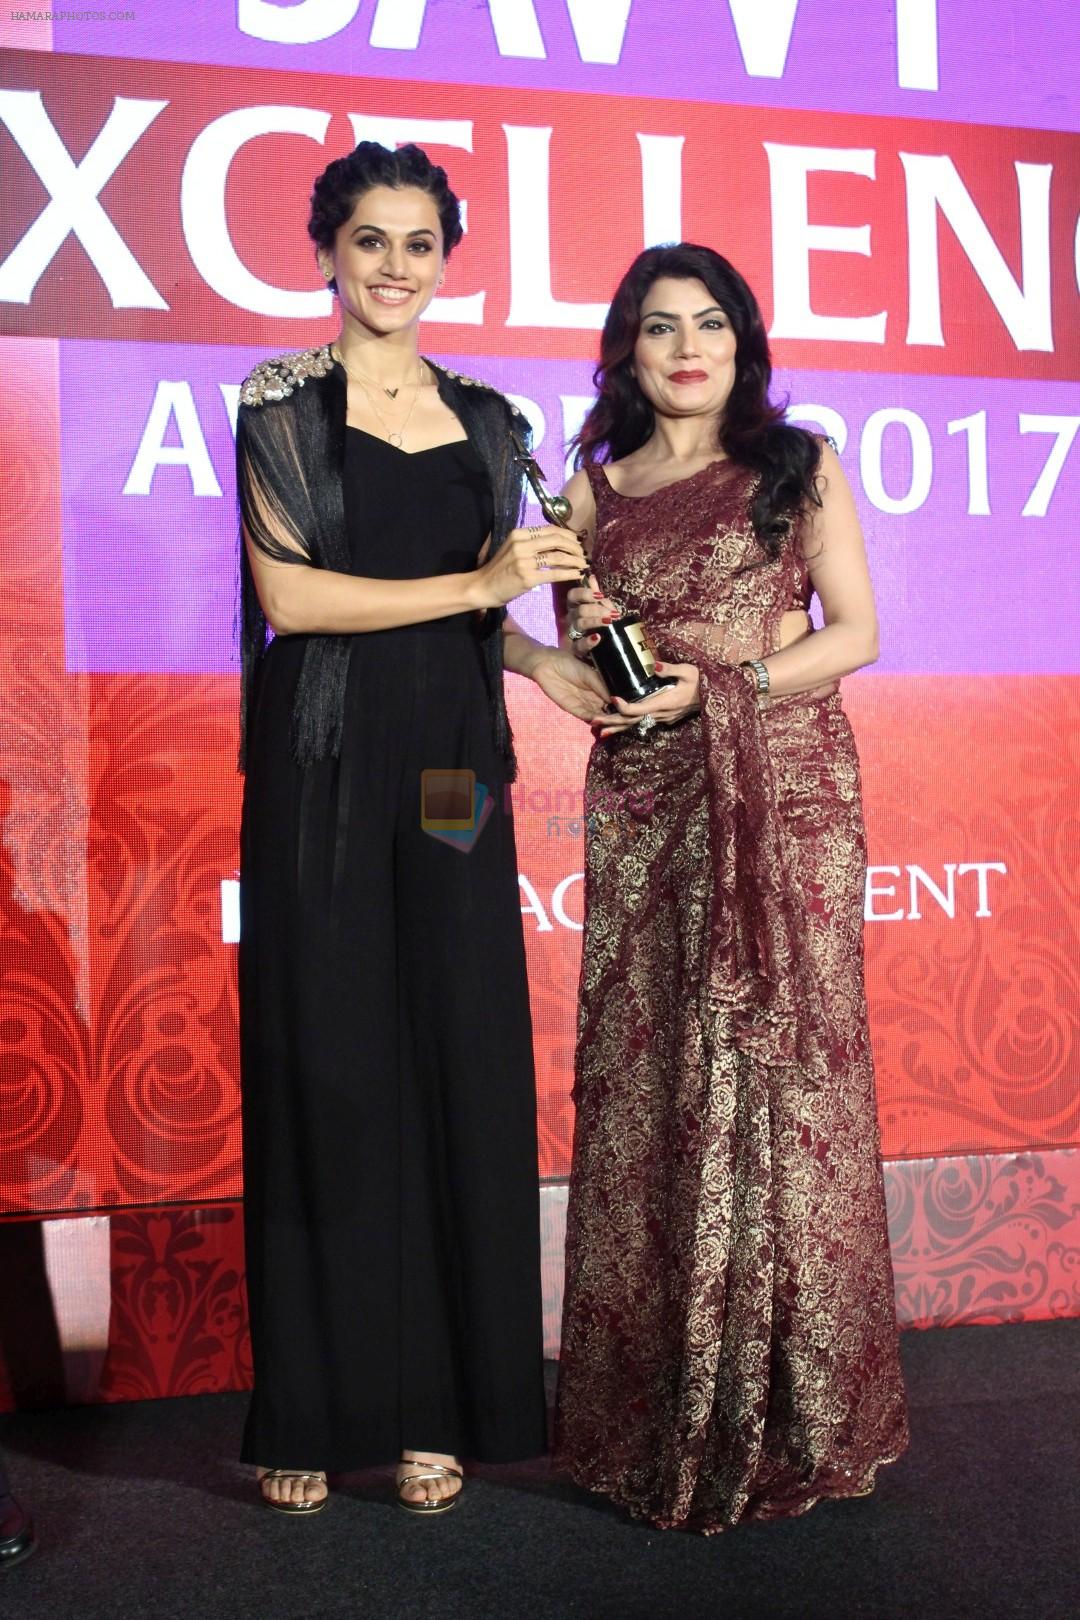 Taapsee Pannu At SAVVY Excellence Award on 21st Aug 2017